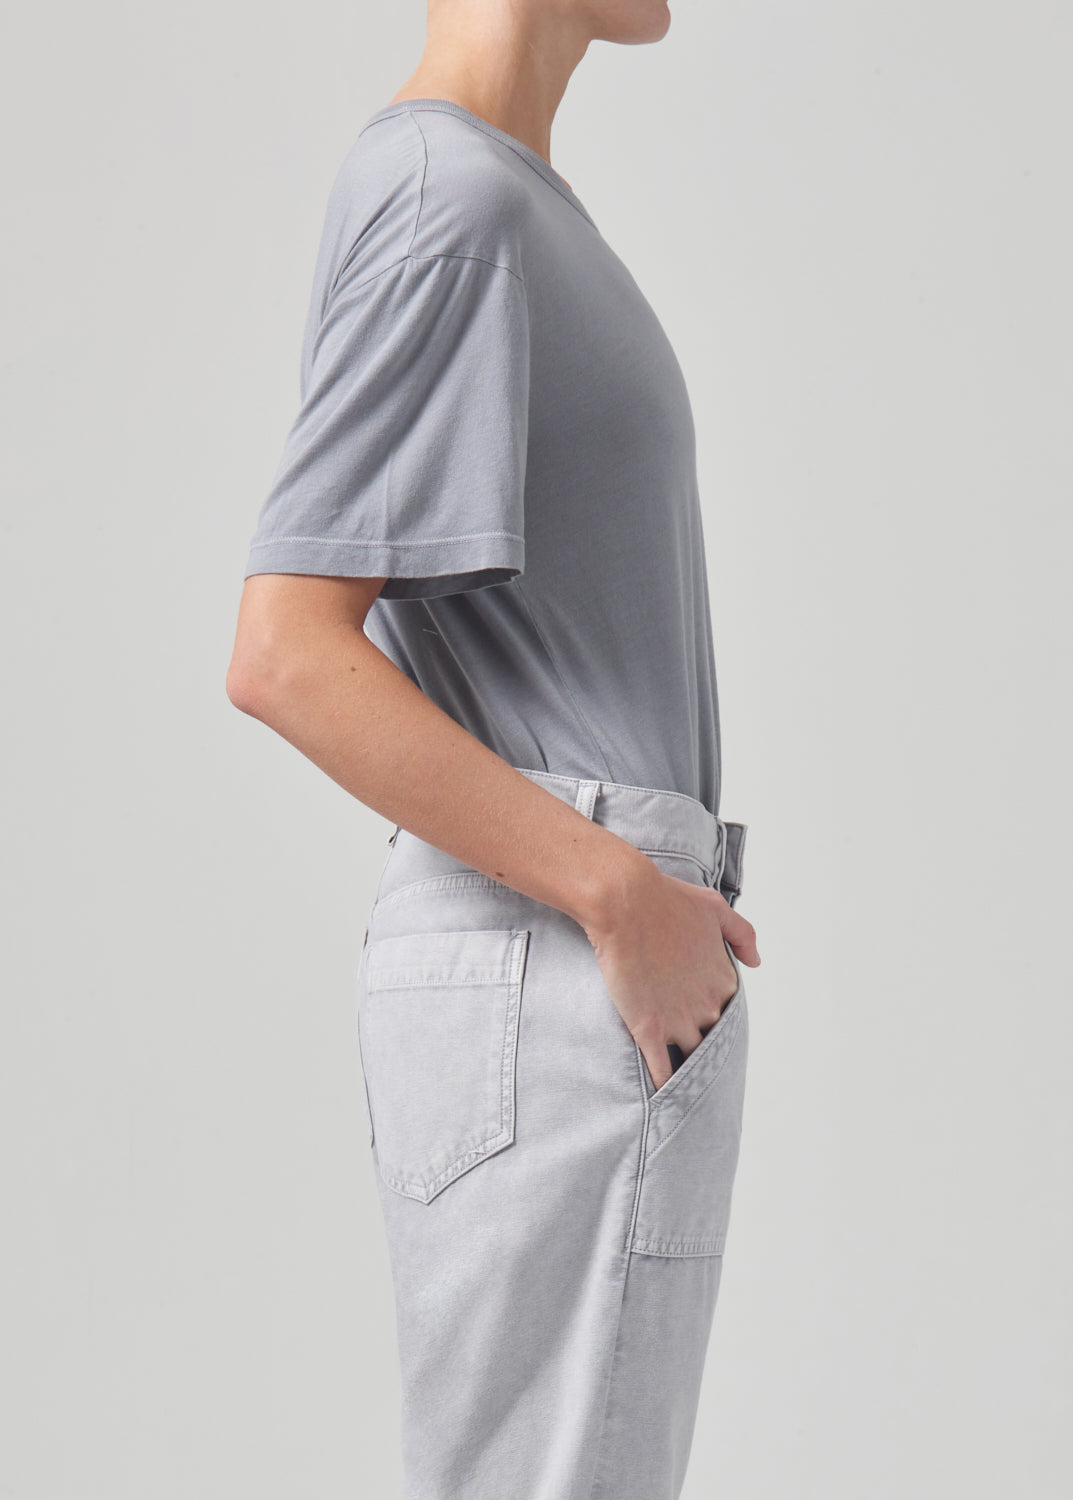 Elisabetta Relaxed Tee in Cyclone Grey